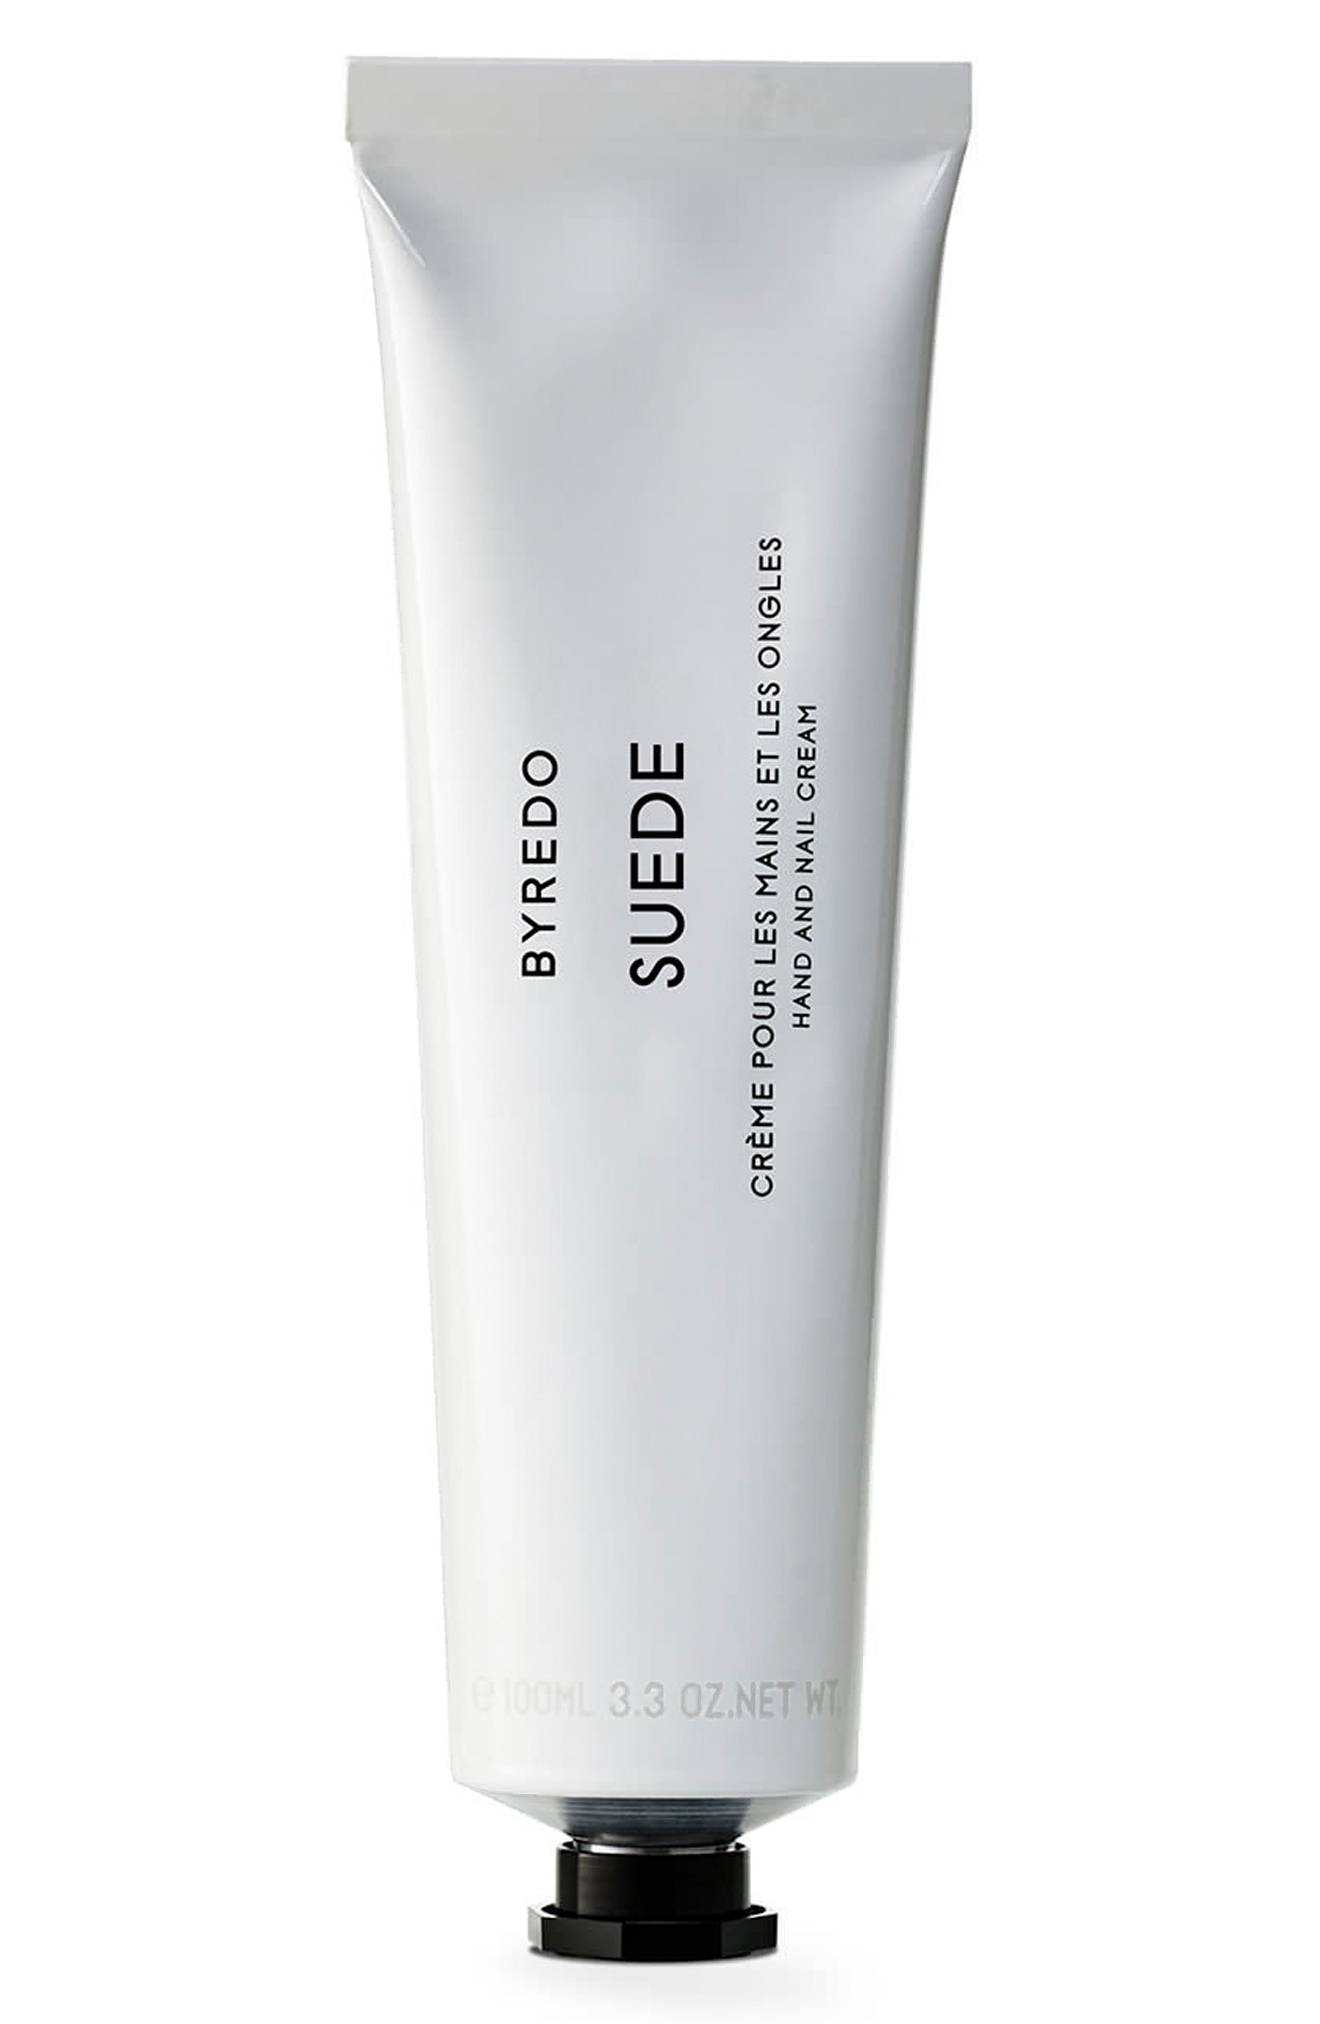 Byredo_Suede_Hand_and_Nail_Cream_71_Nordstrom-0002.jpeg